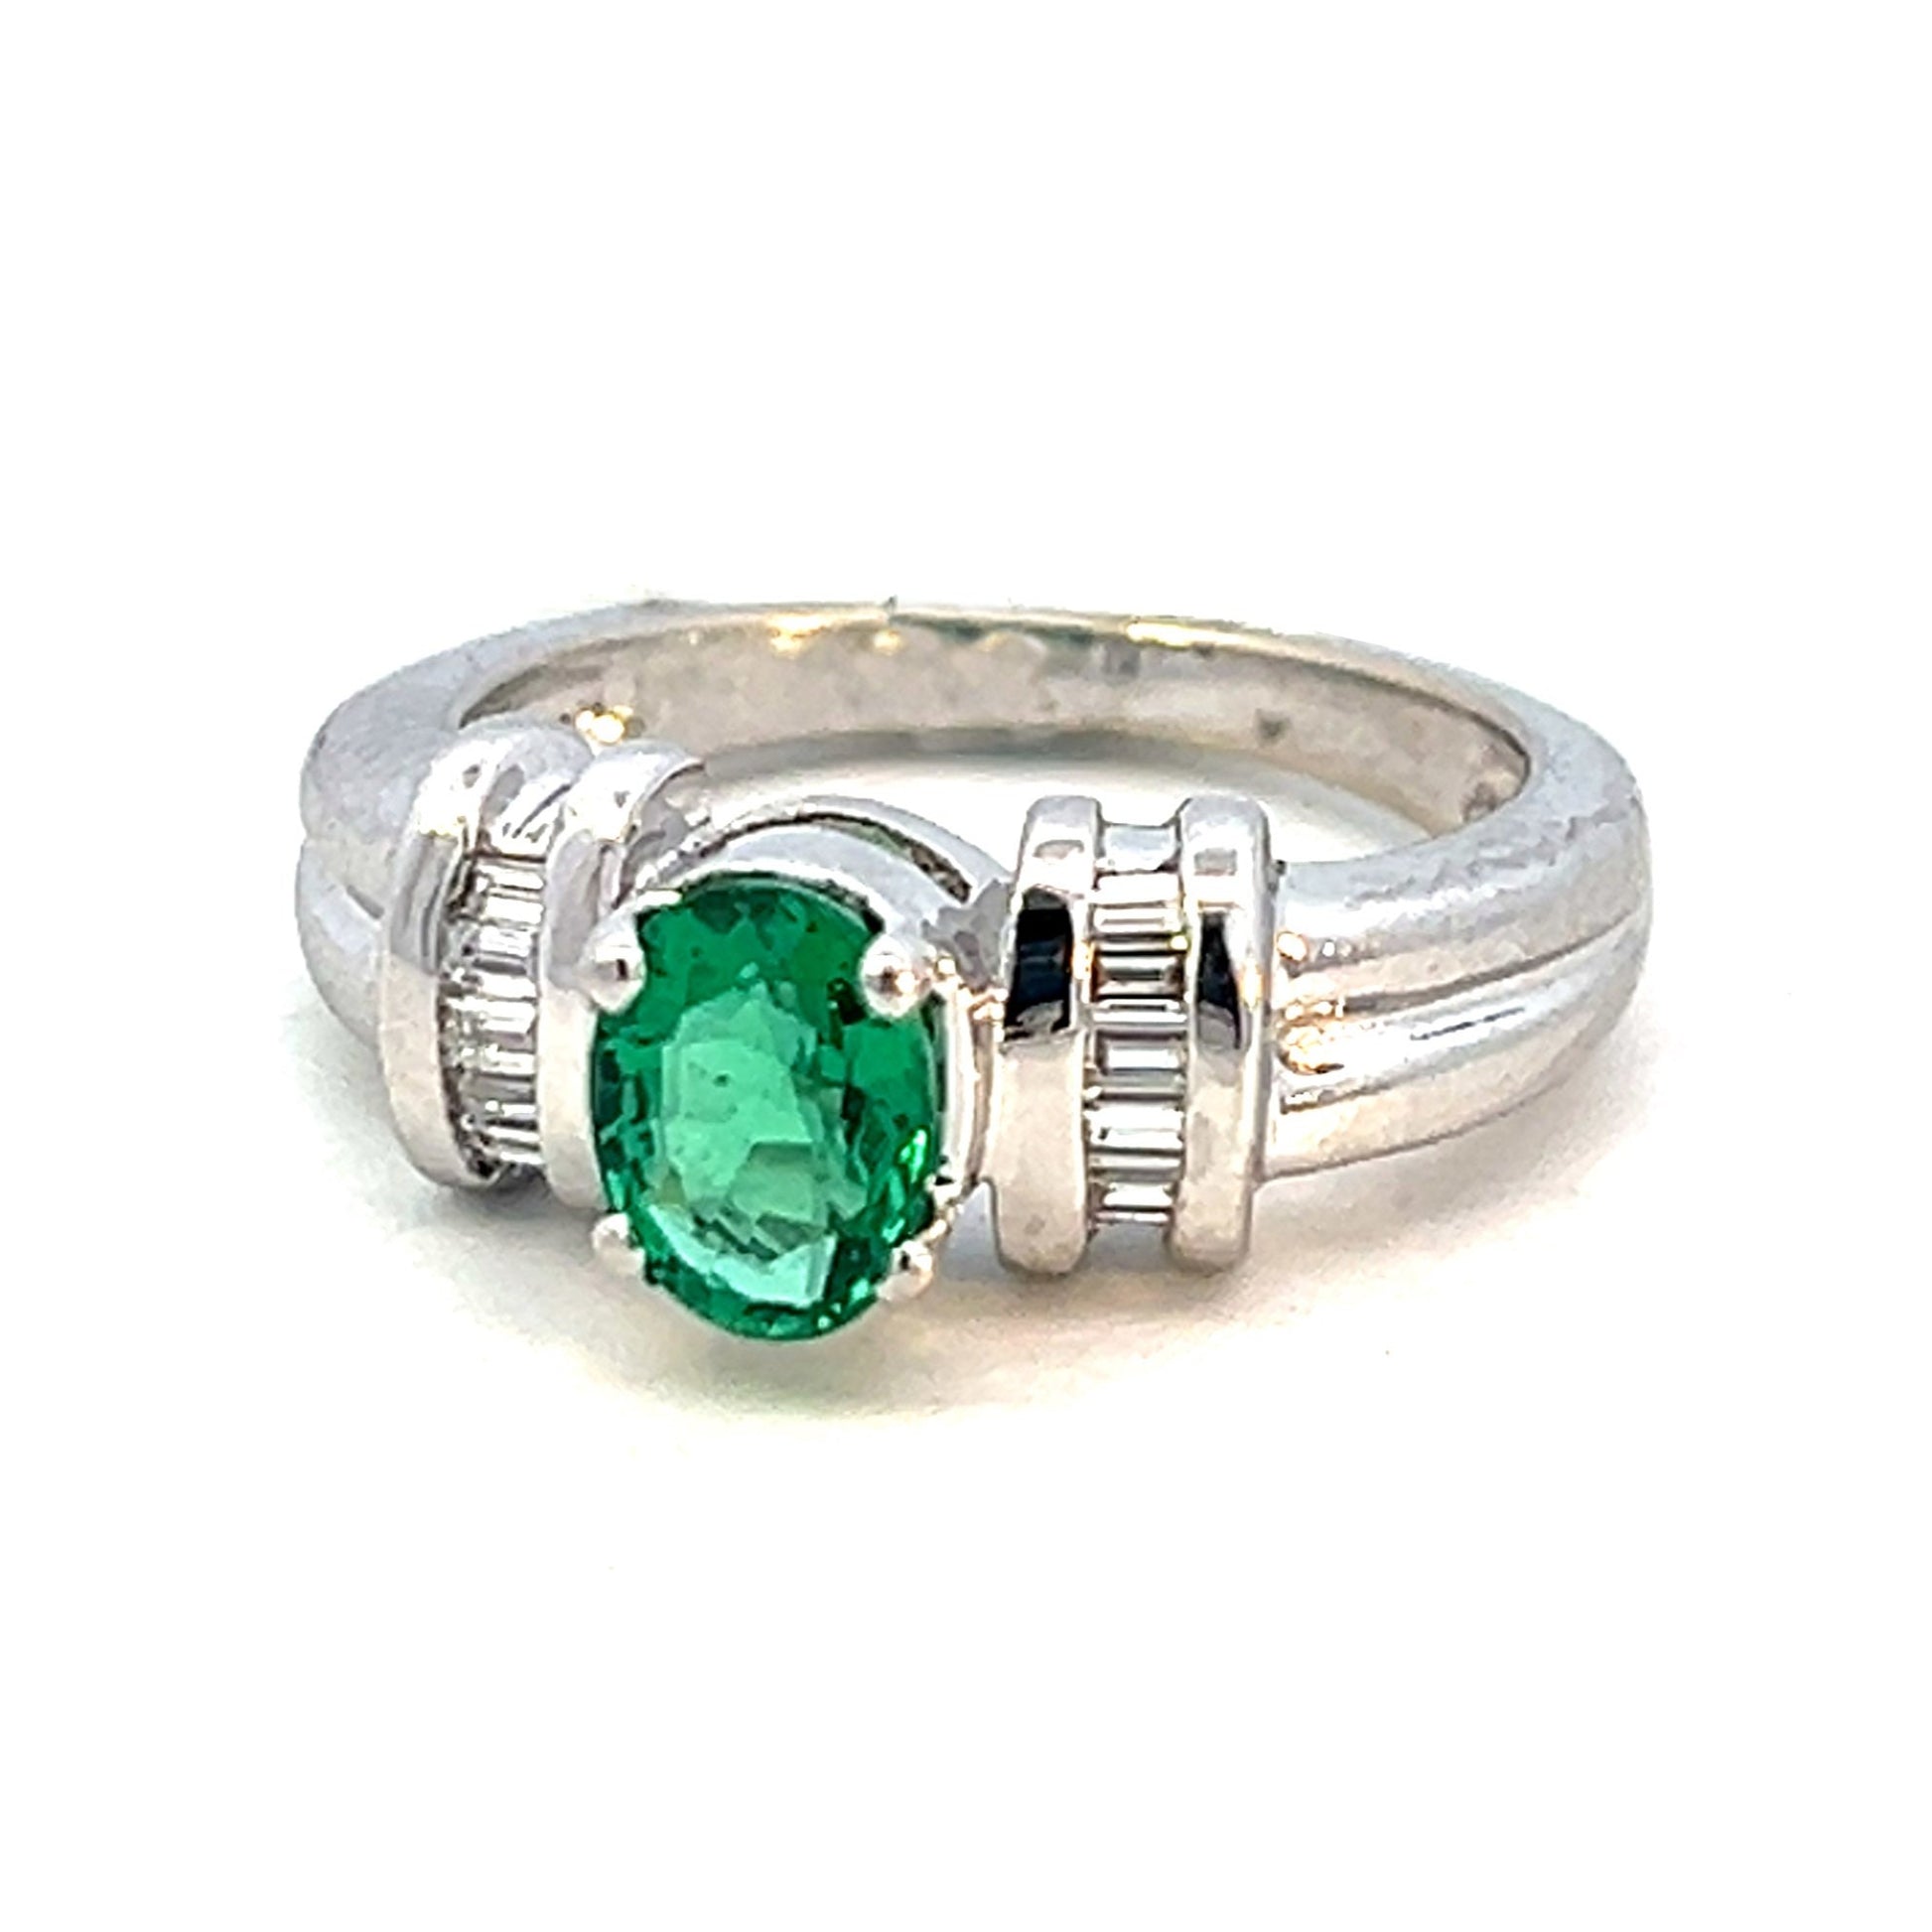 1.14cttw Oval Emerald Ring | Emerald Green Engagement Rings